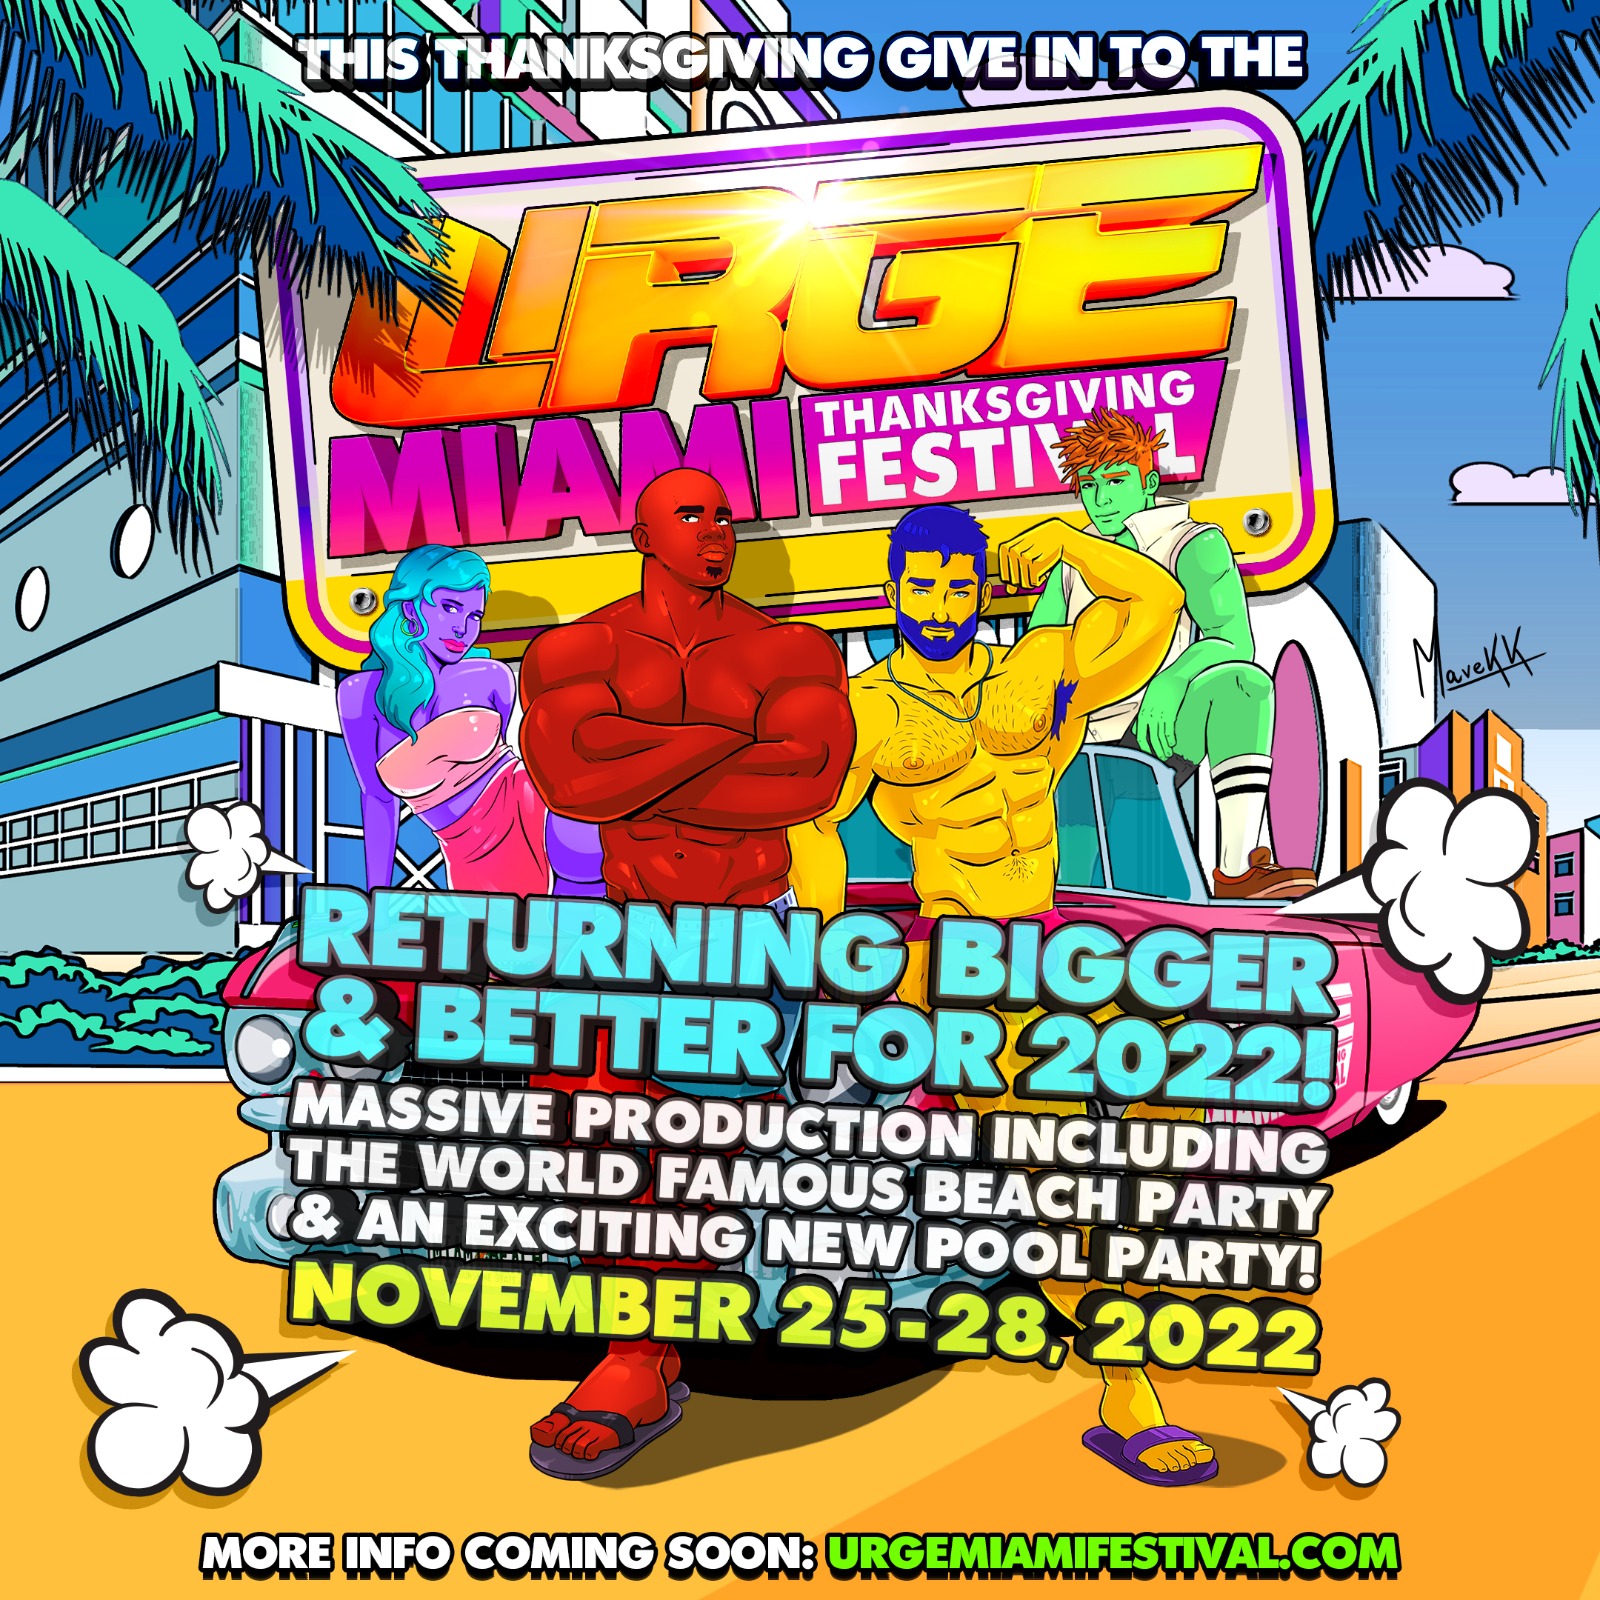 Buy Tickets to Passes URGE Miami Thanksgiving Festival 22 in Miami on